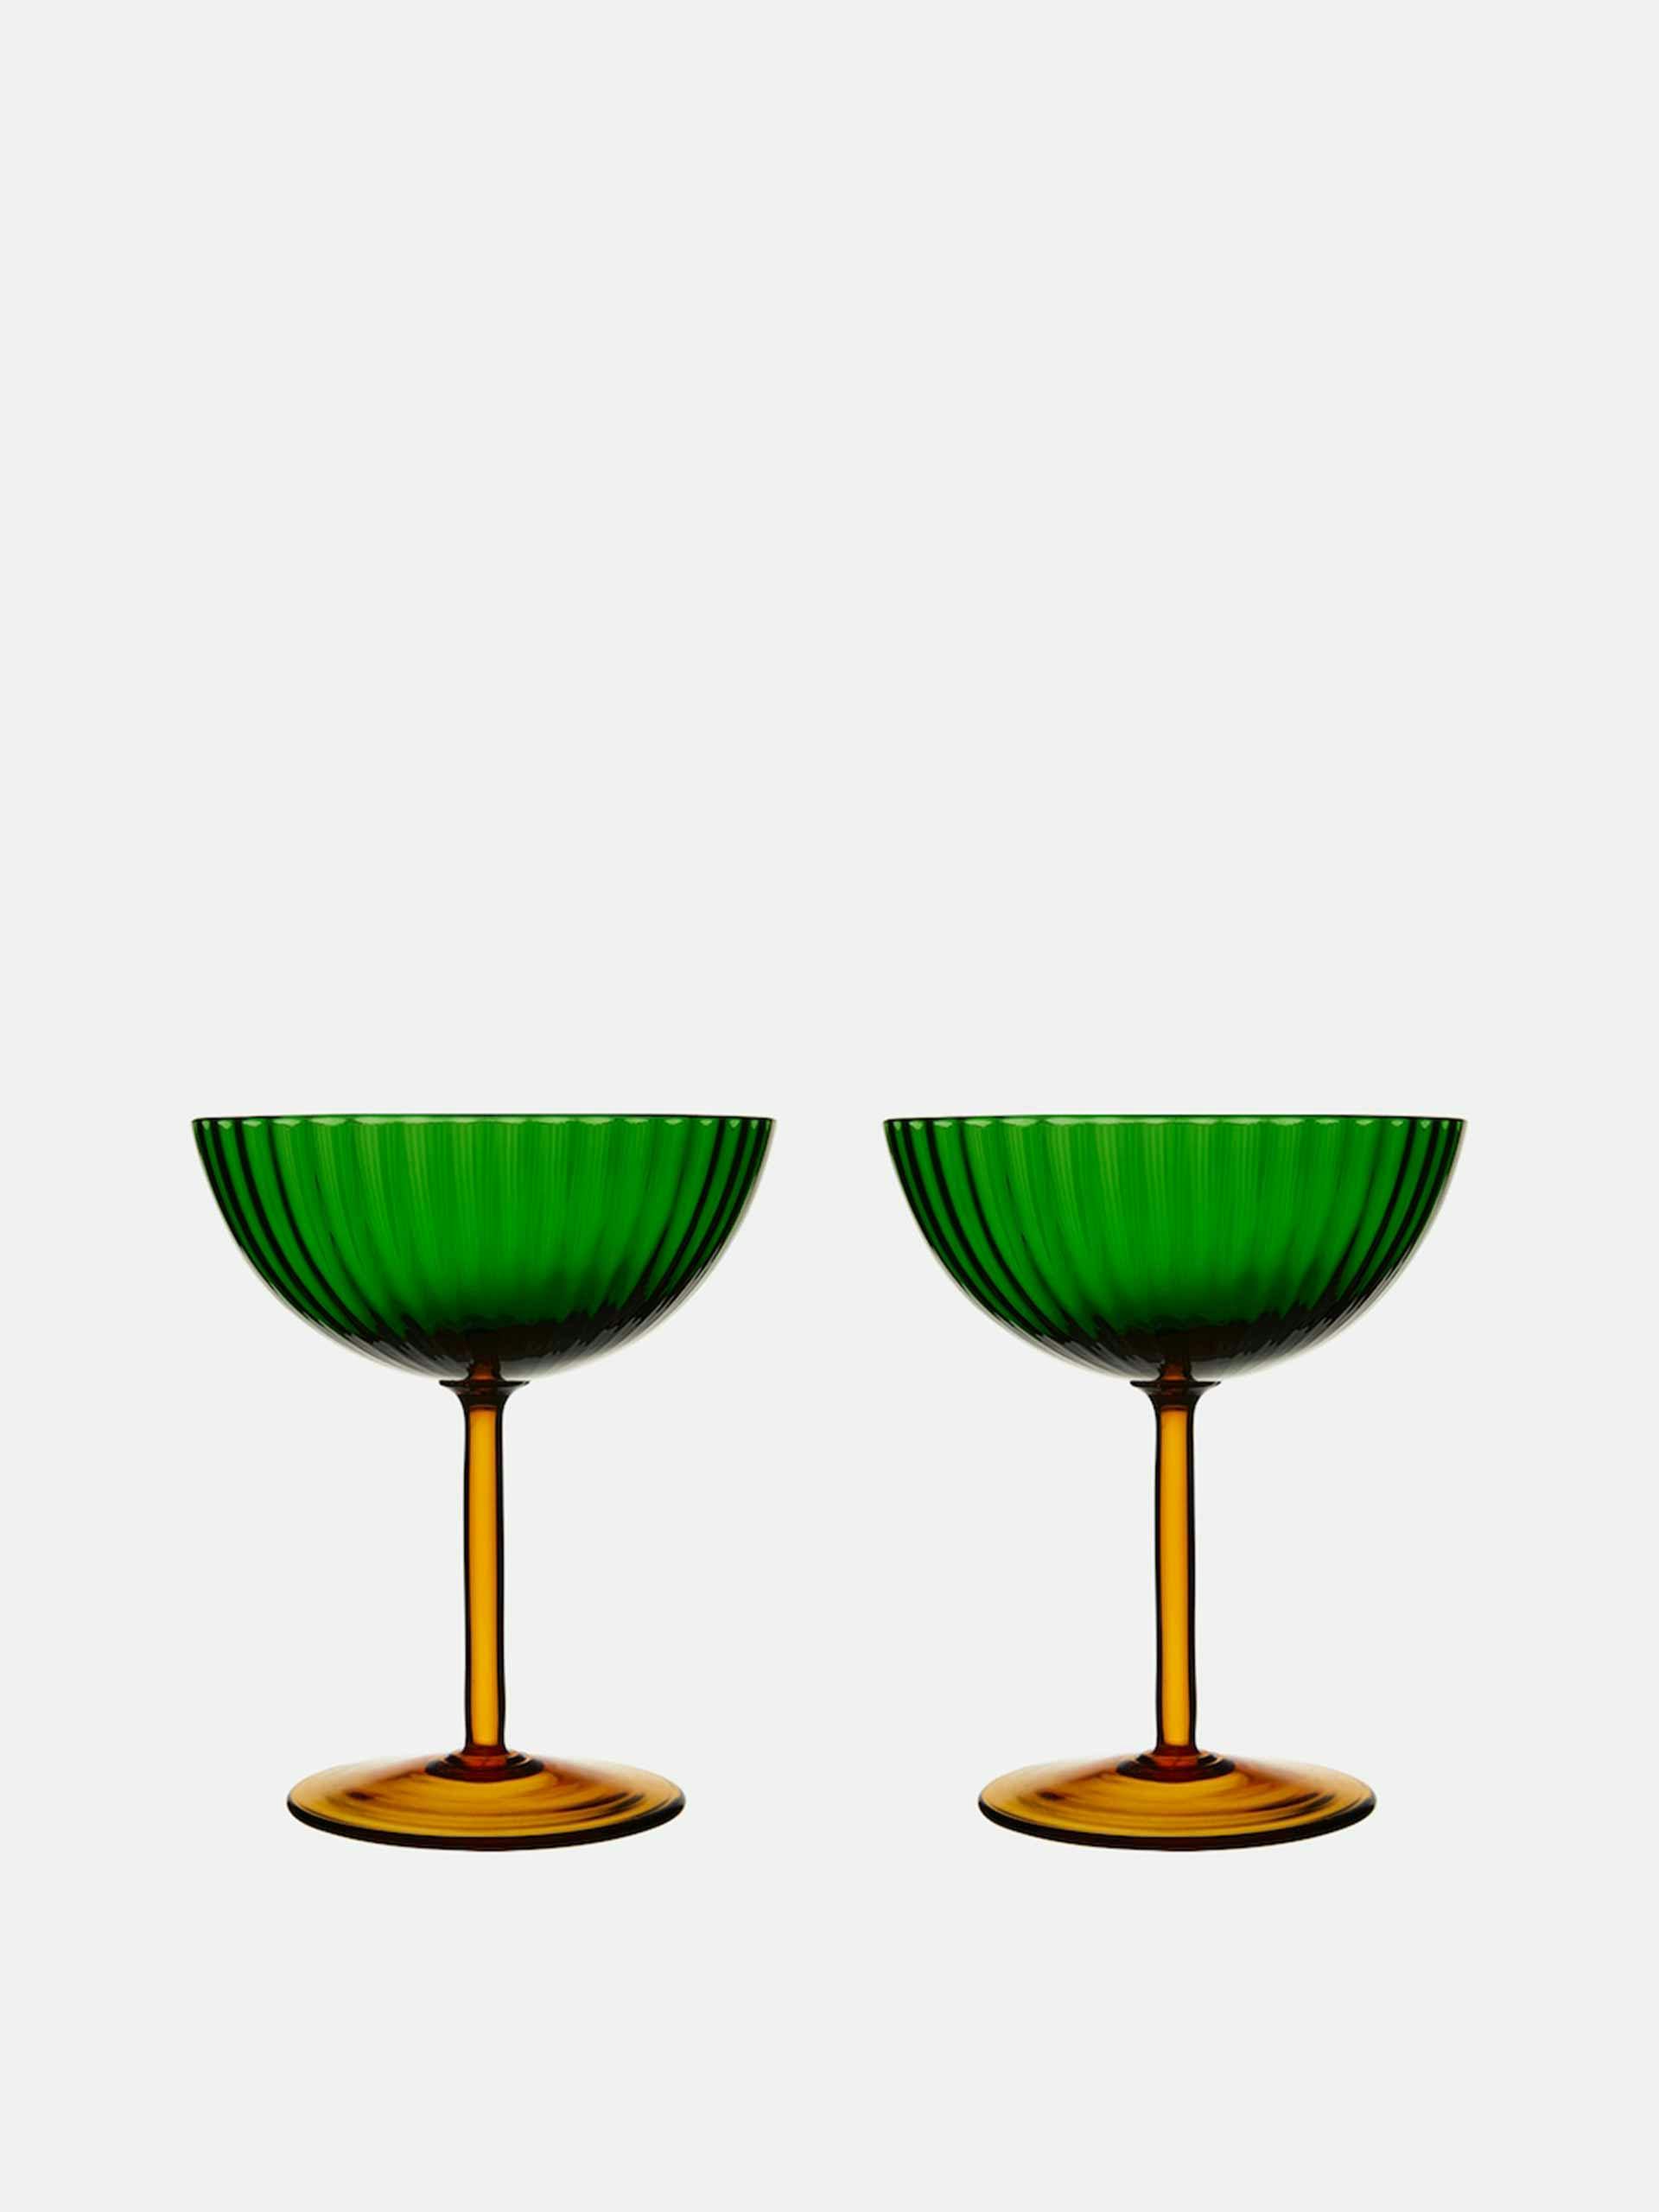 Green and yellow champagne coup glasses (set of 2)